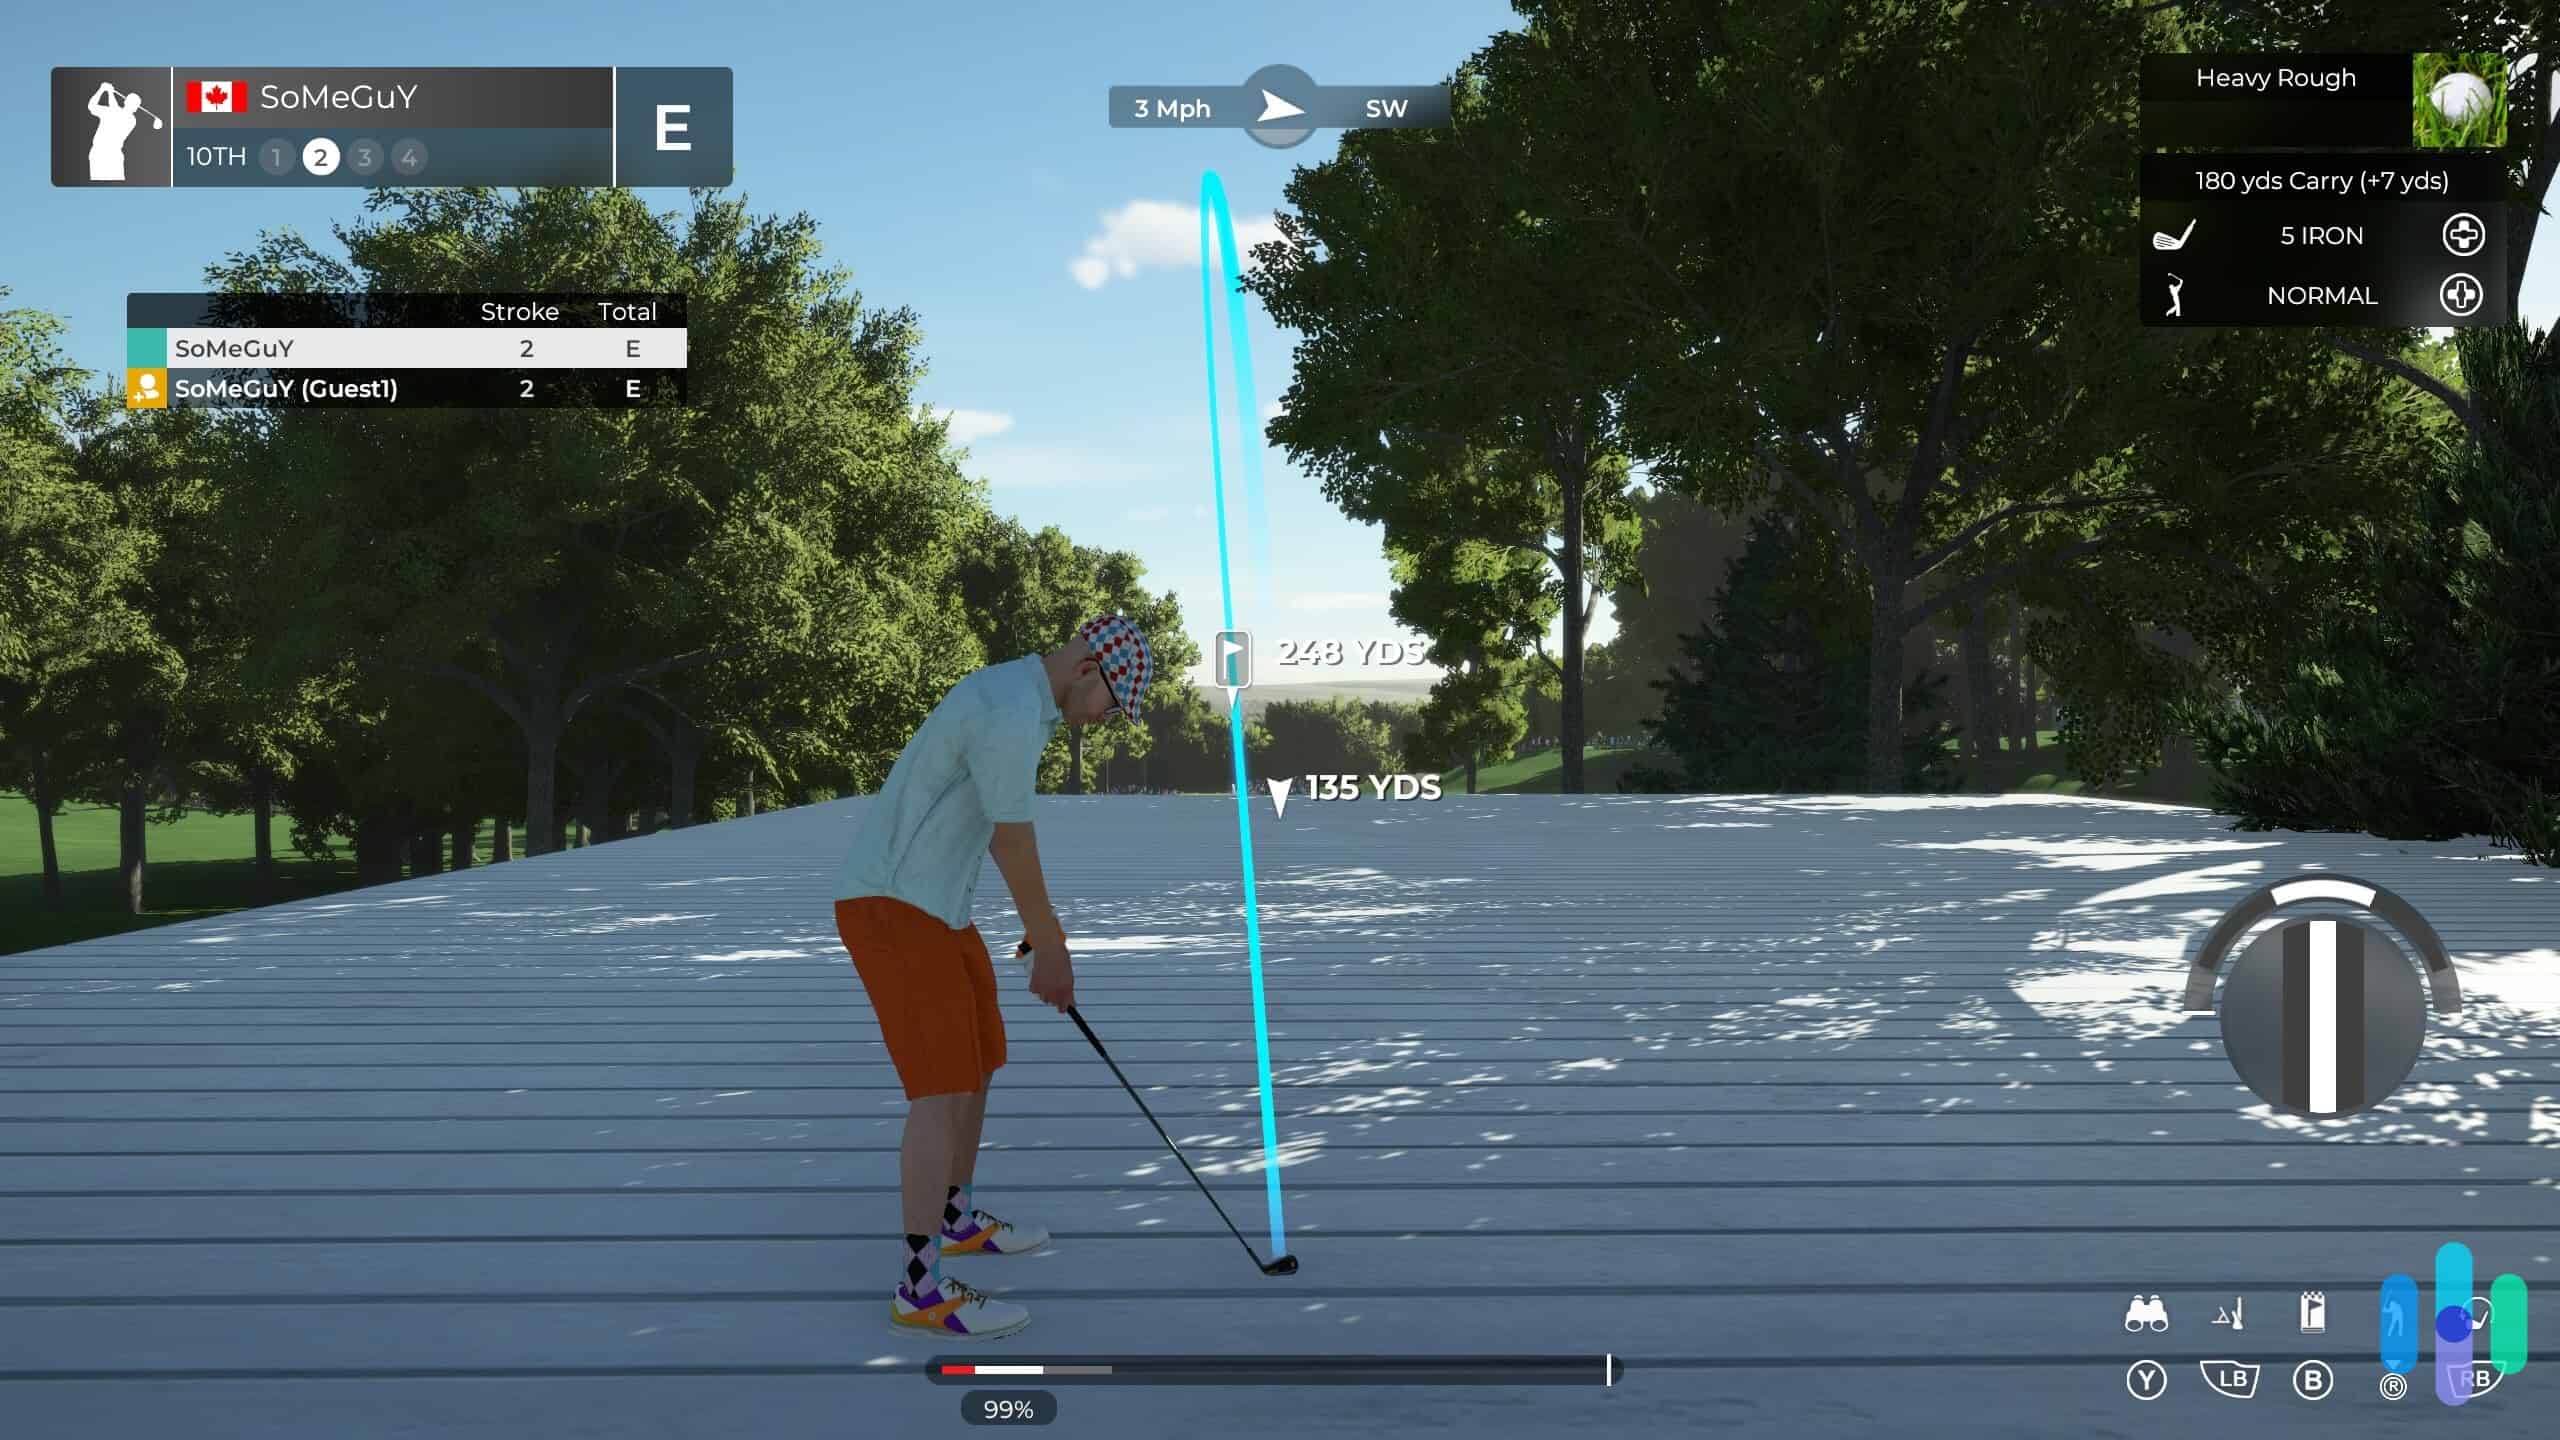 Playing PGA Tour Golf on the Xbox with ExpressVPN